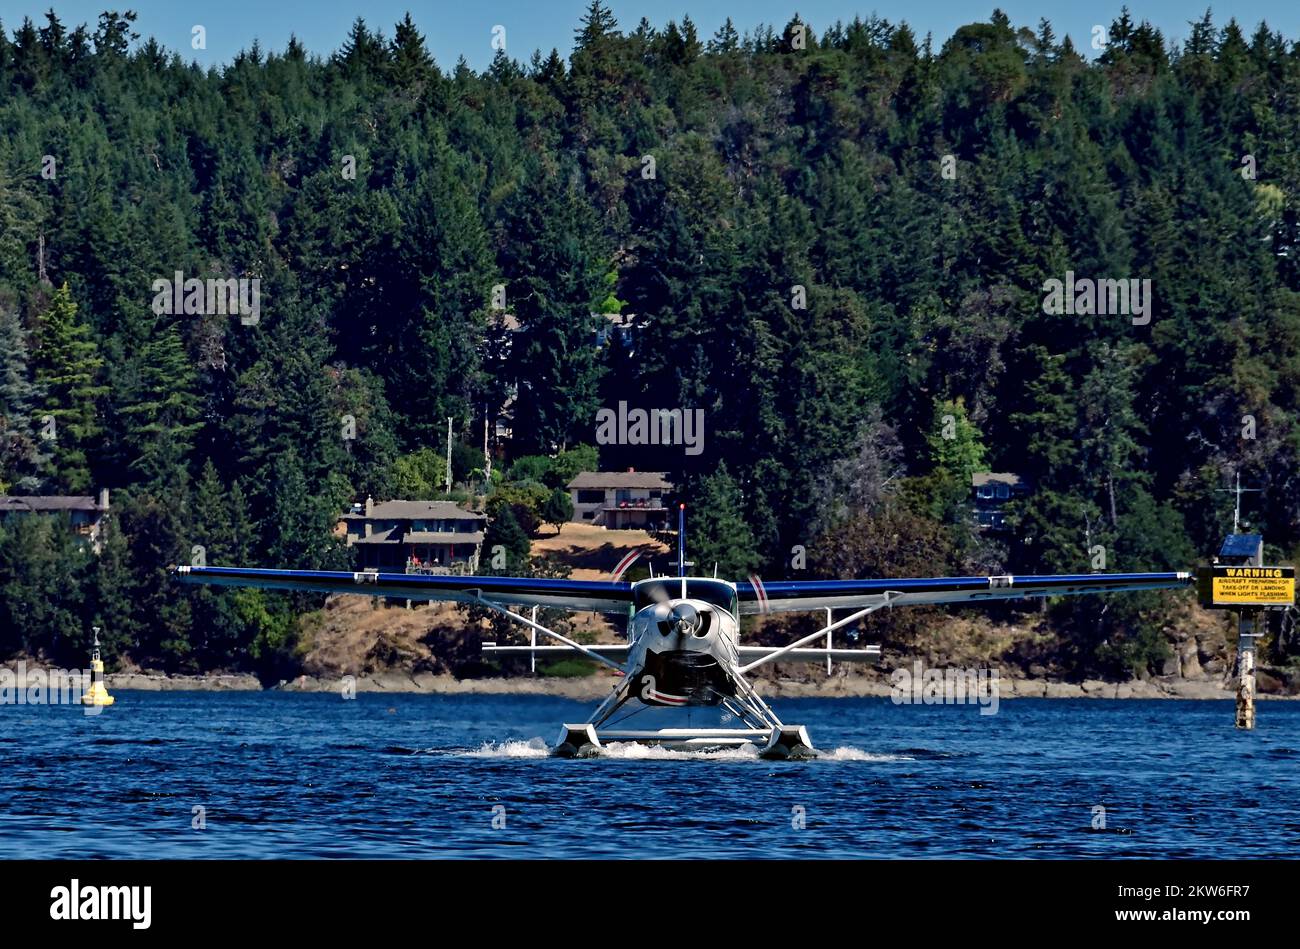 A front view of a float plane taking off on the water on the coast of Vancouver Island in British Columbia Canada. Stock Photo